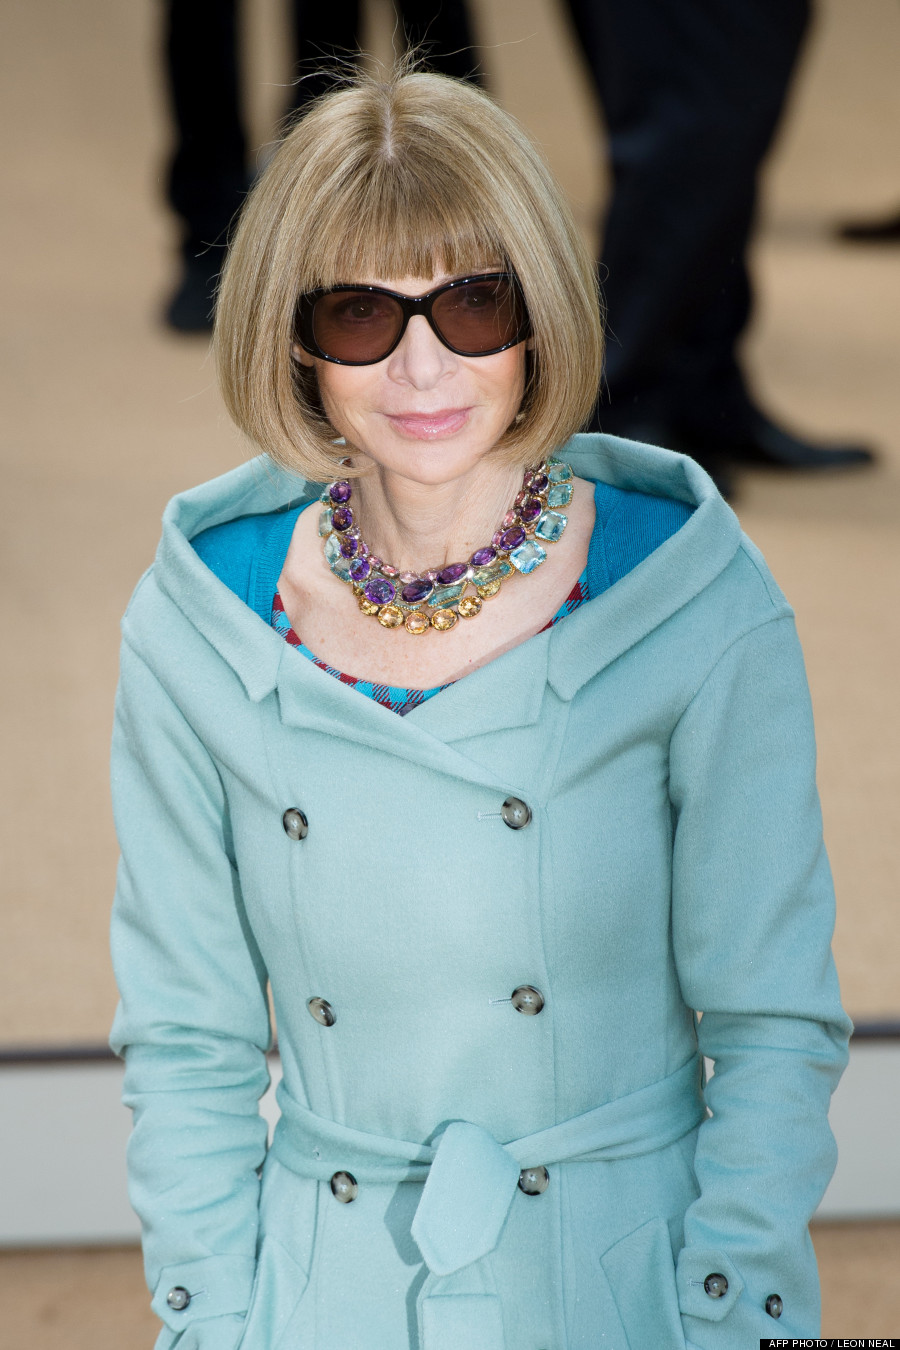 Vogue Editors Then And Now: Anna Wintour's Haircut Hasn't Changed (PHOTOS)